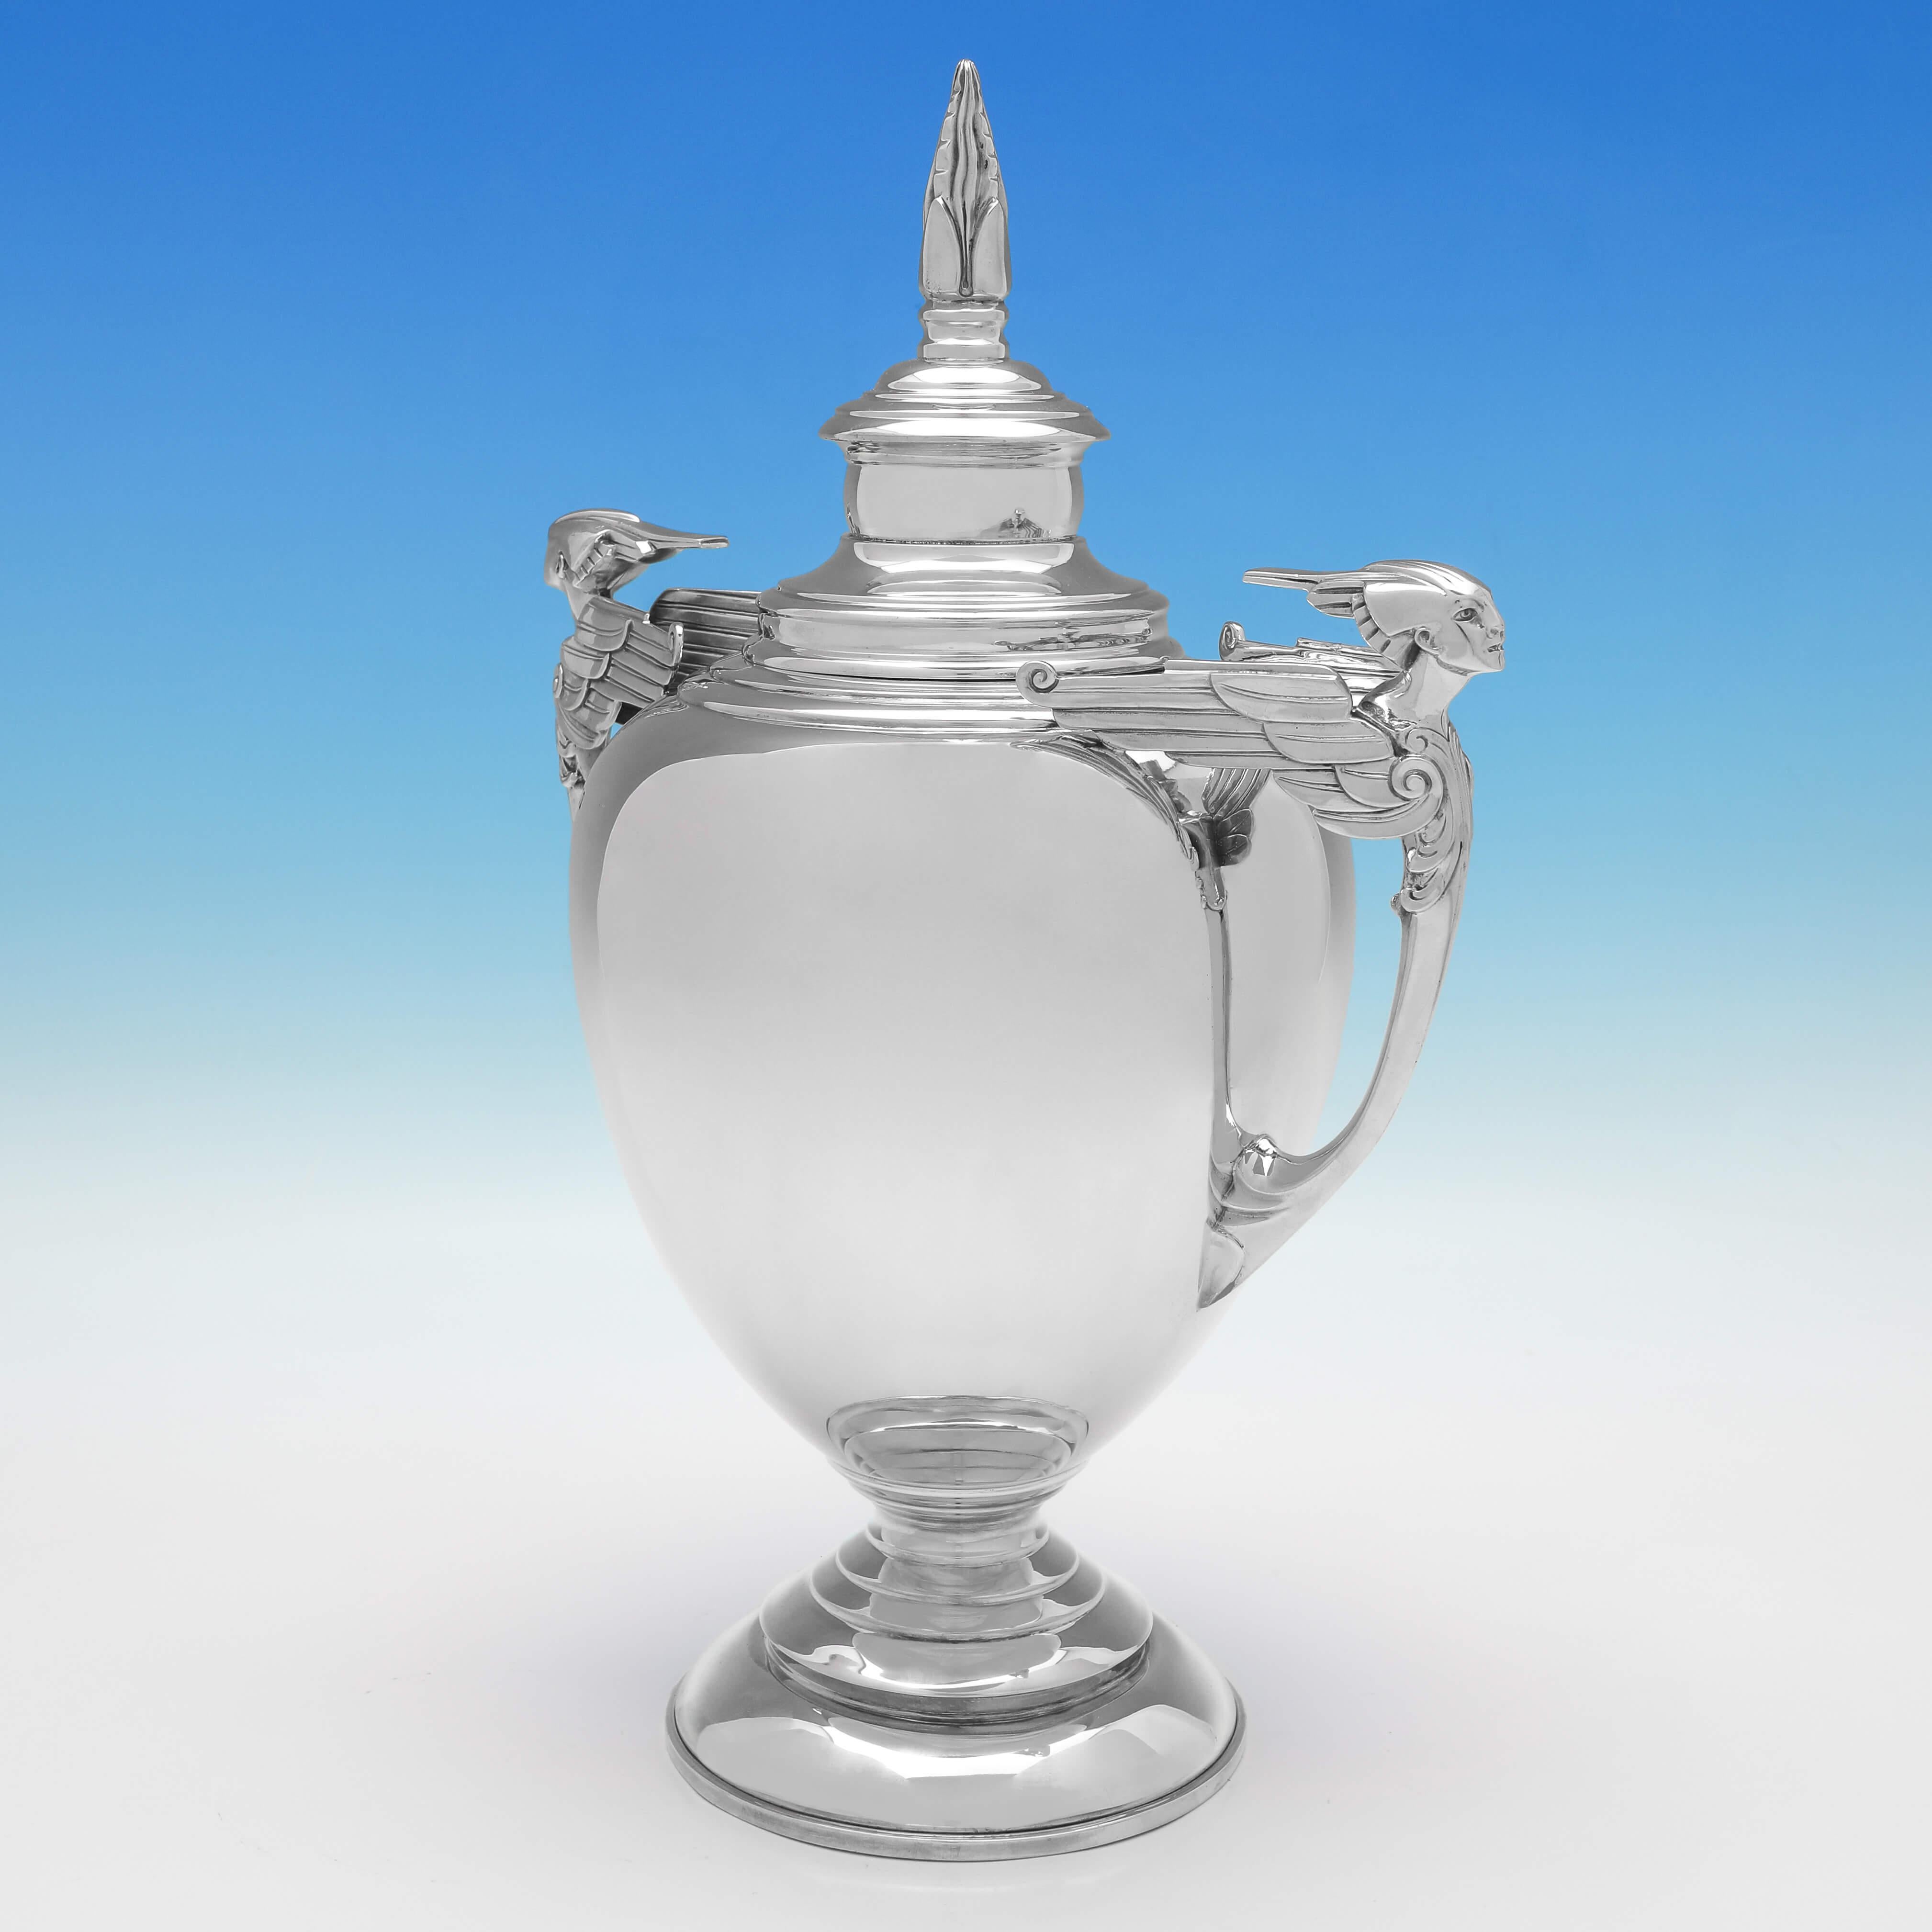 Hallmarked in London in 1931 by William Bruford & Son, this very handsome, Sterling Silver Trophy, is in the Art Deco taste, with striking handles, and a stepped base and lid. 

The trophy measures 14.5